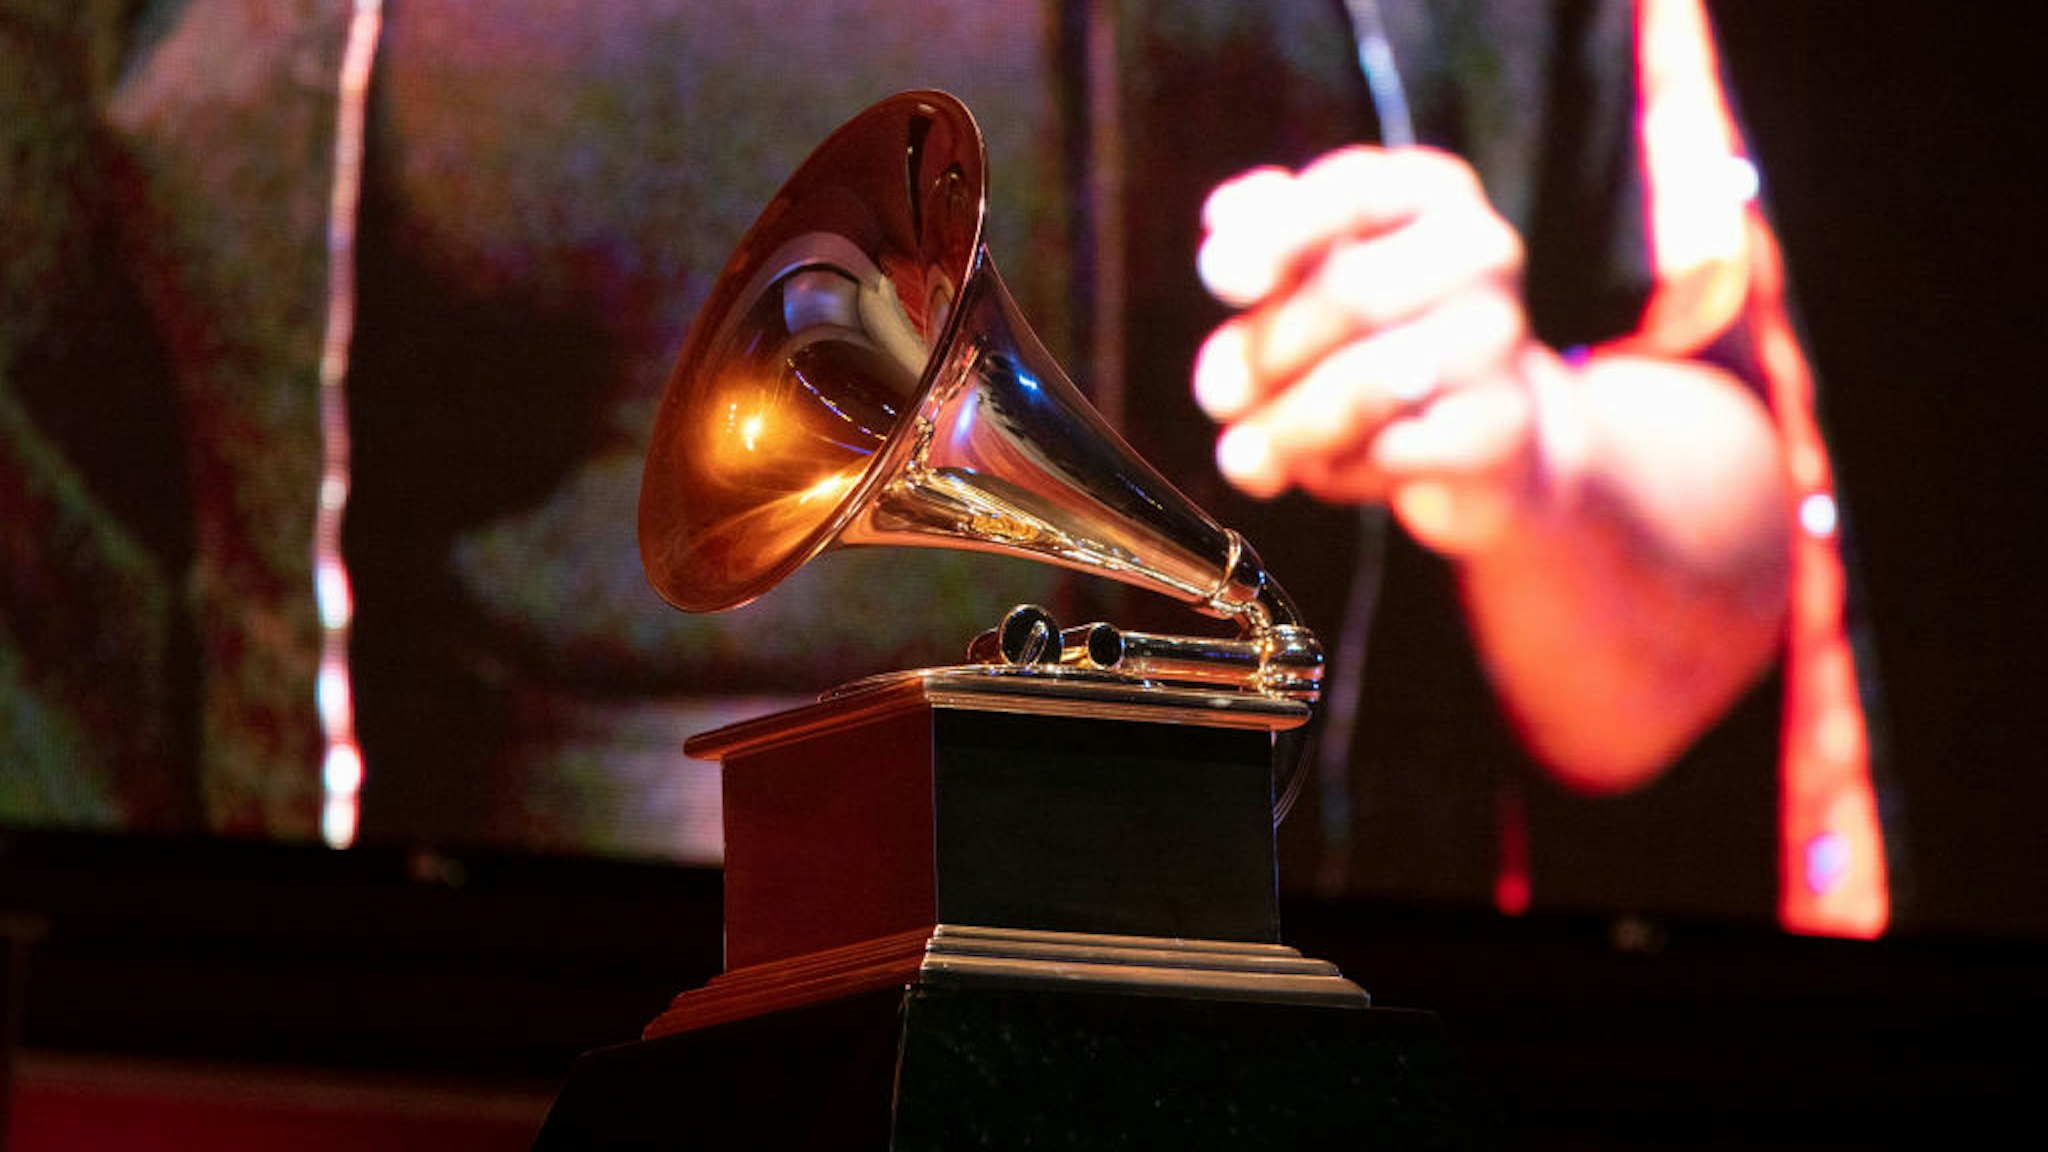 CHICAGO, ILLINOIS - SEPTEMBER 16: A view of a Grammy statue during a performance at the Chicago Chapter 60th Anniversary Concert at Millennium Park on September 16, 2021 in Chicago, Illinois. (Photo by Jeff Schear/Getty Images for The Recording Academy)